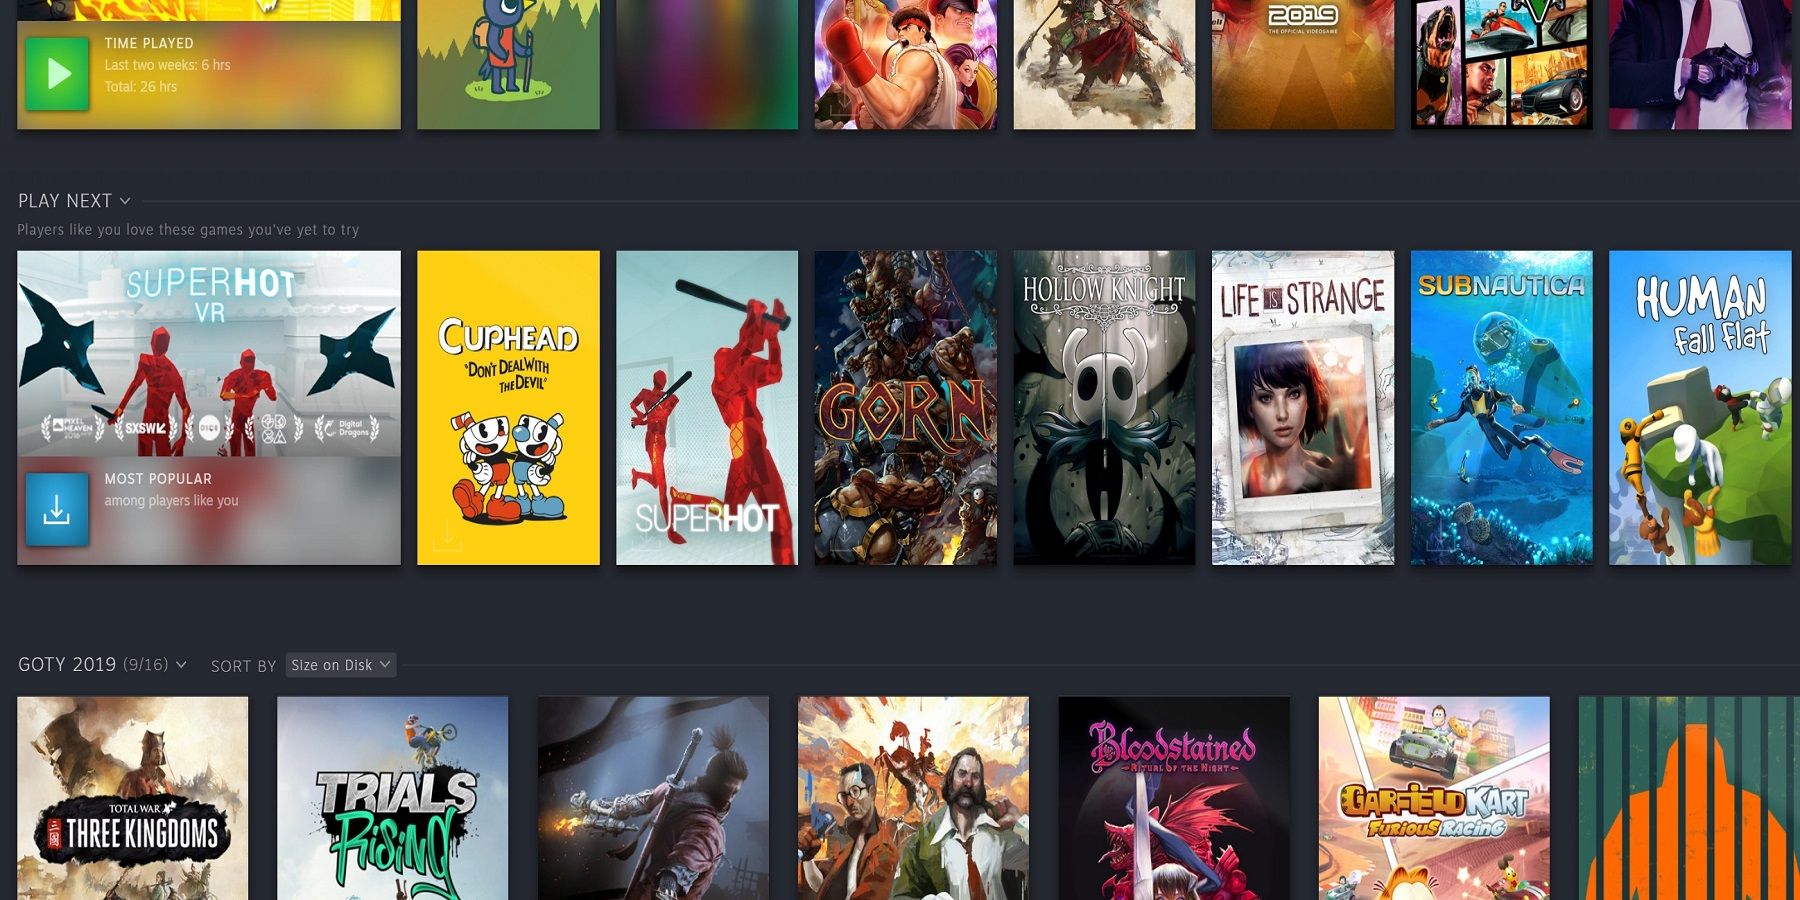 An image showing a series of Steam games, including Super Hot, Cuphead, and Life is Strange.